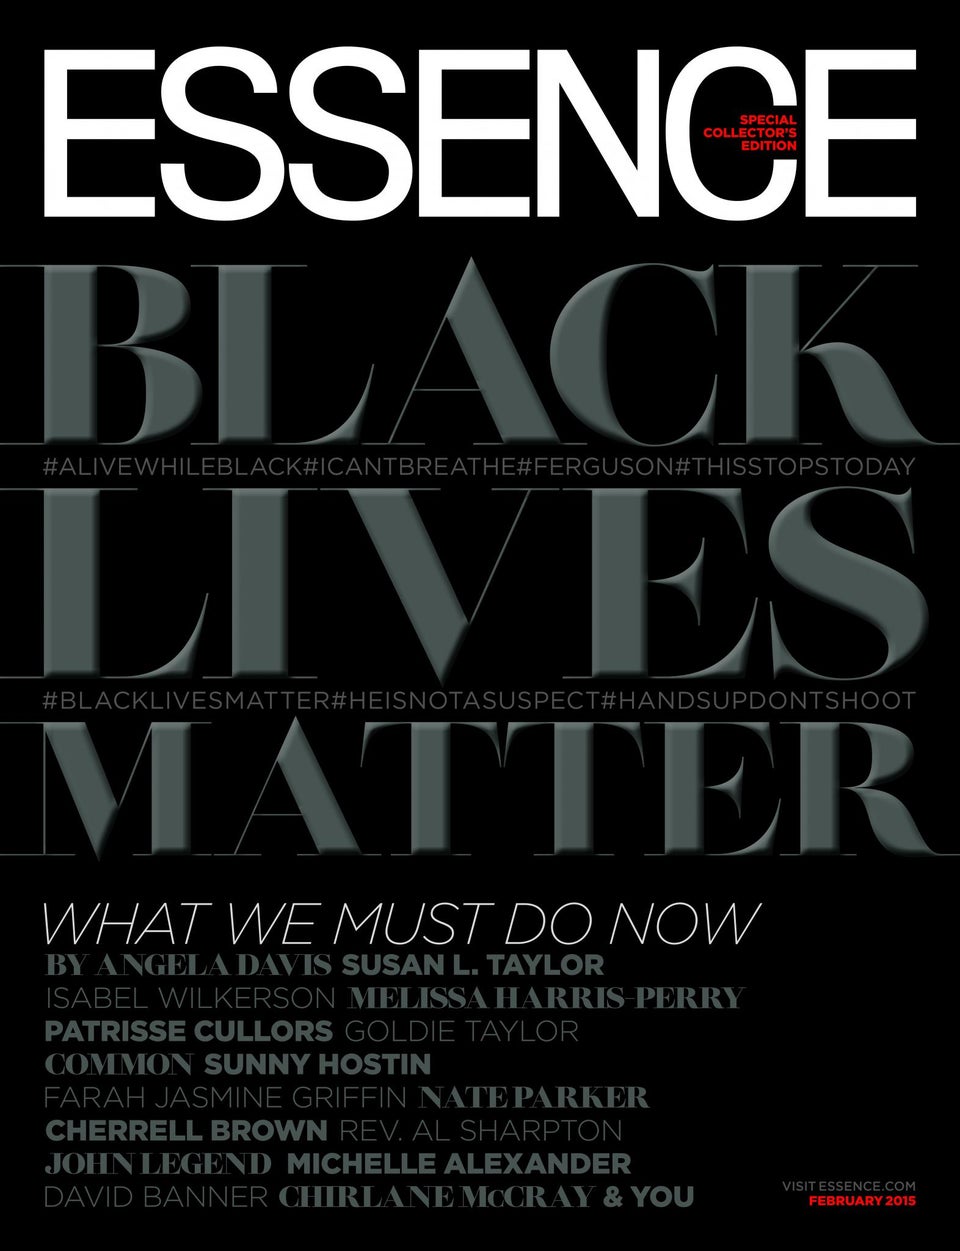 A Historic ESSENCE Cover and The Path Forward